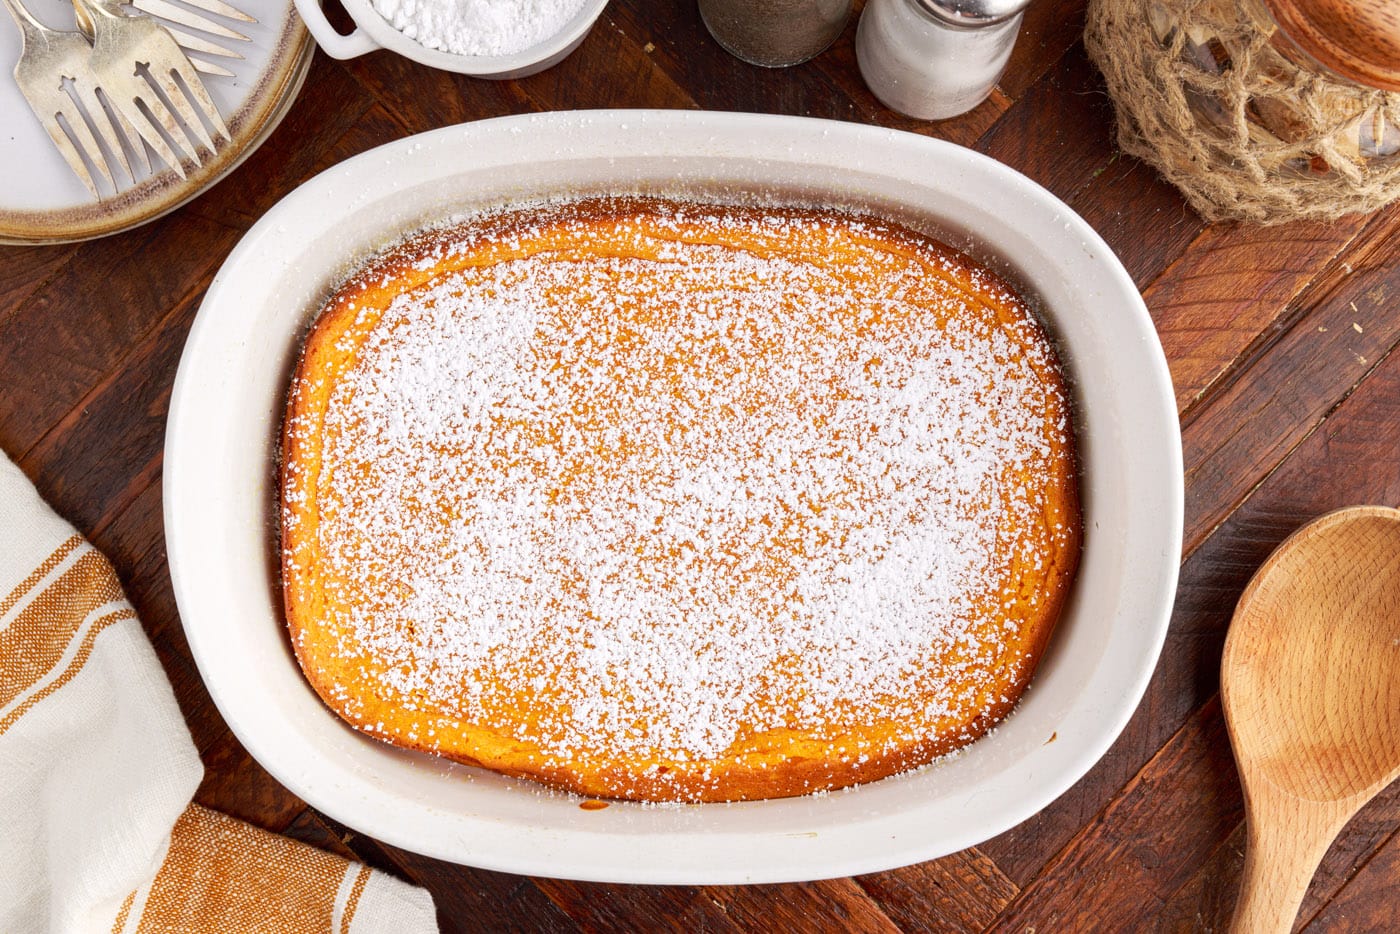 powdered sugar dusted over carrot souffle